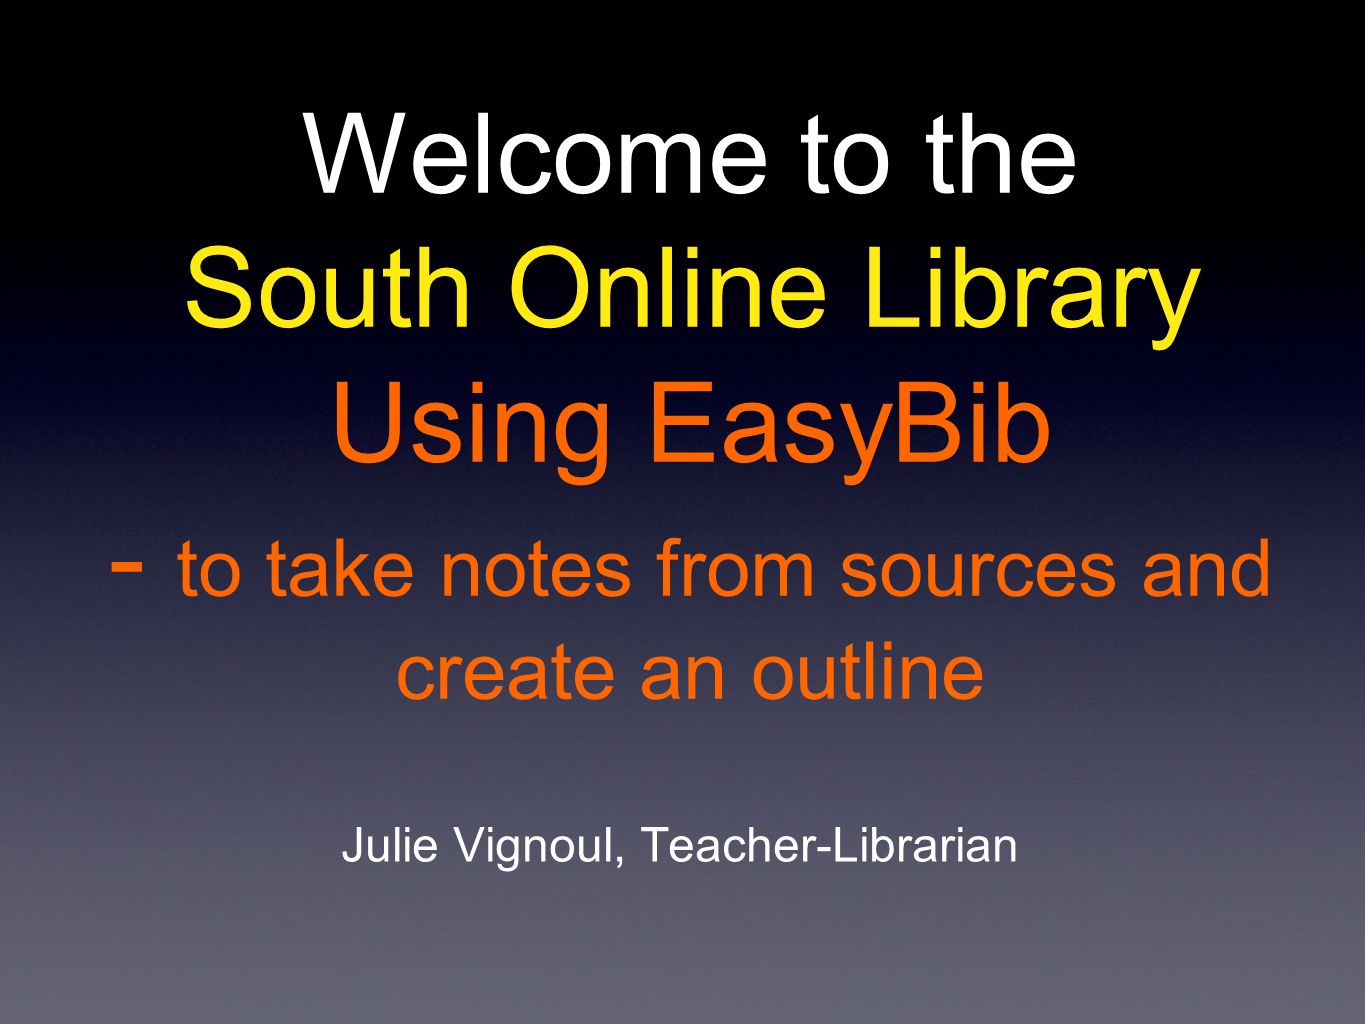 Welcome to the South Online Library Using EasyBib - to take notes from sources and create an outline Julie Vignoul, Teacher-Librarian